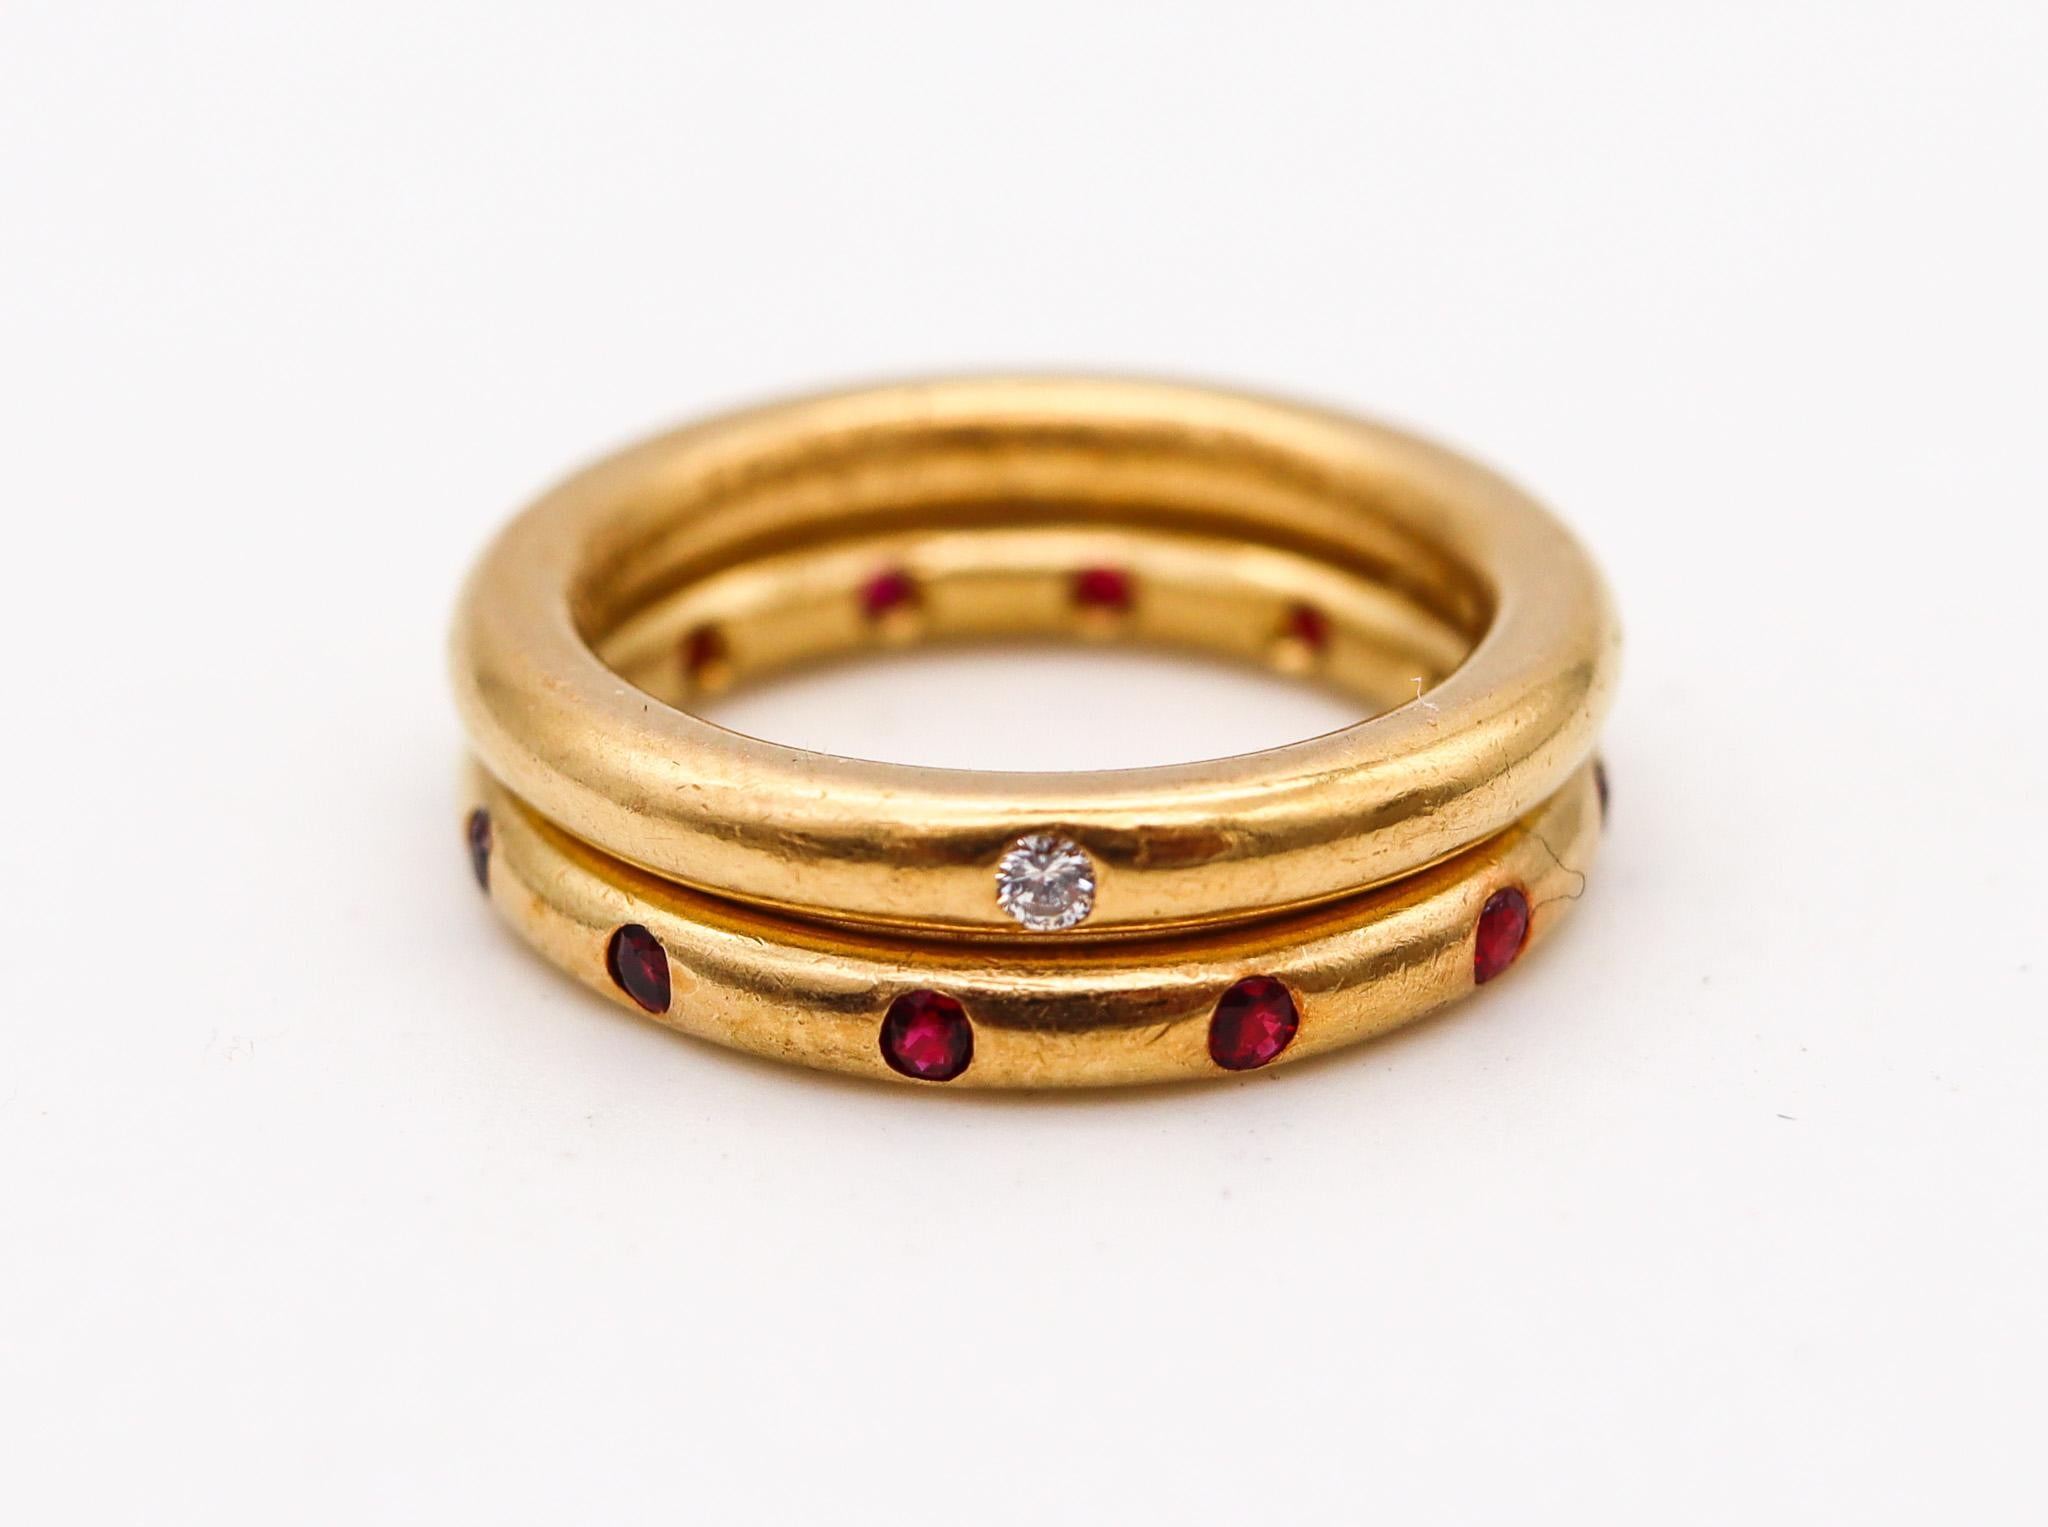 Revival Reinstein Ross Stackable Duo Rings In 22Kt Yellow Gold With Rubies and a Diamond For Sale